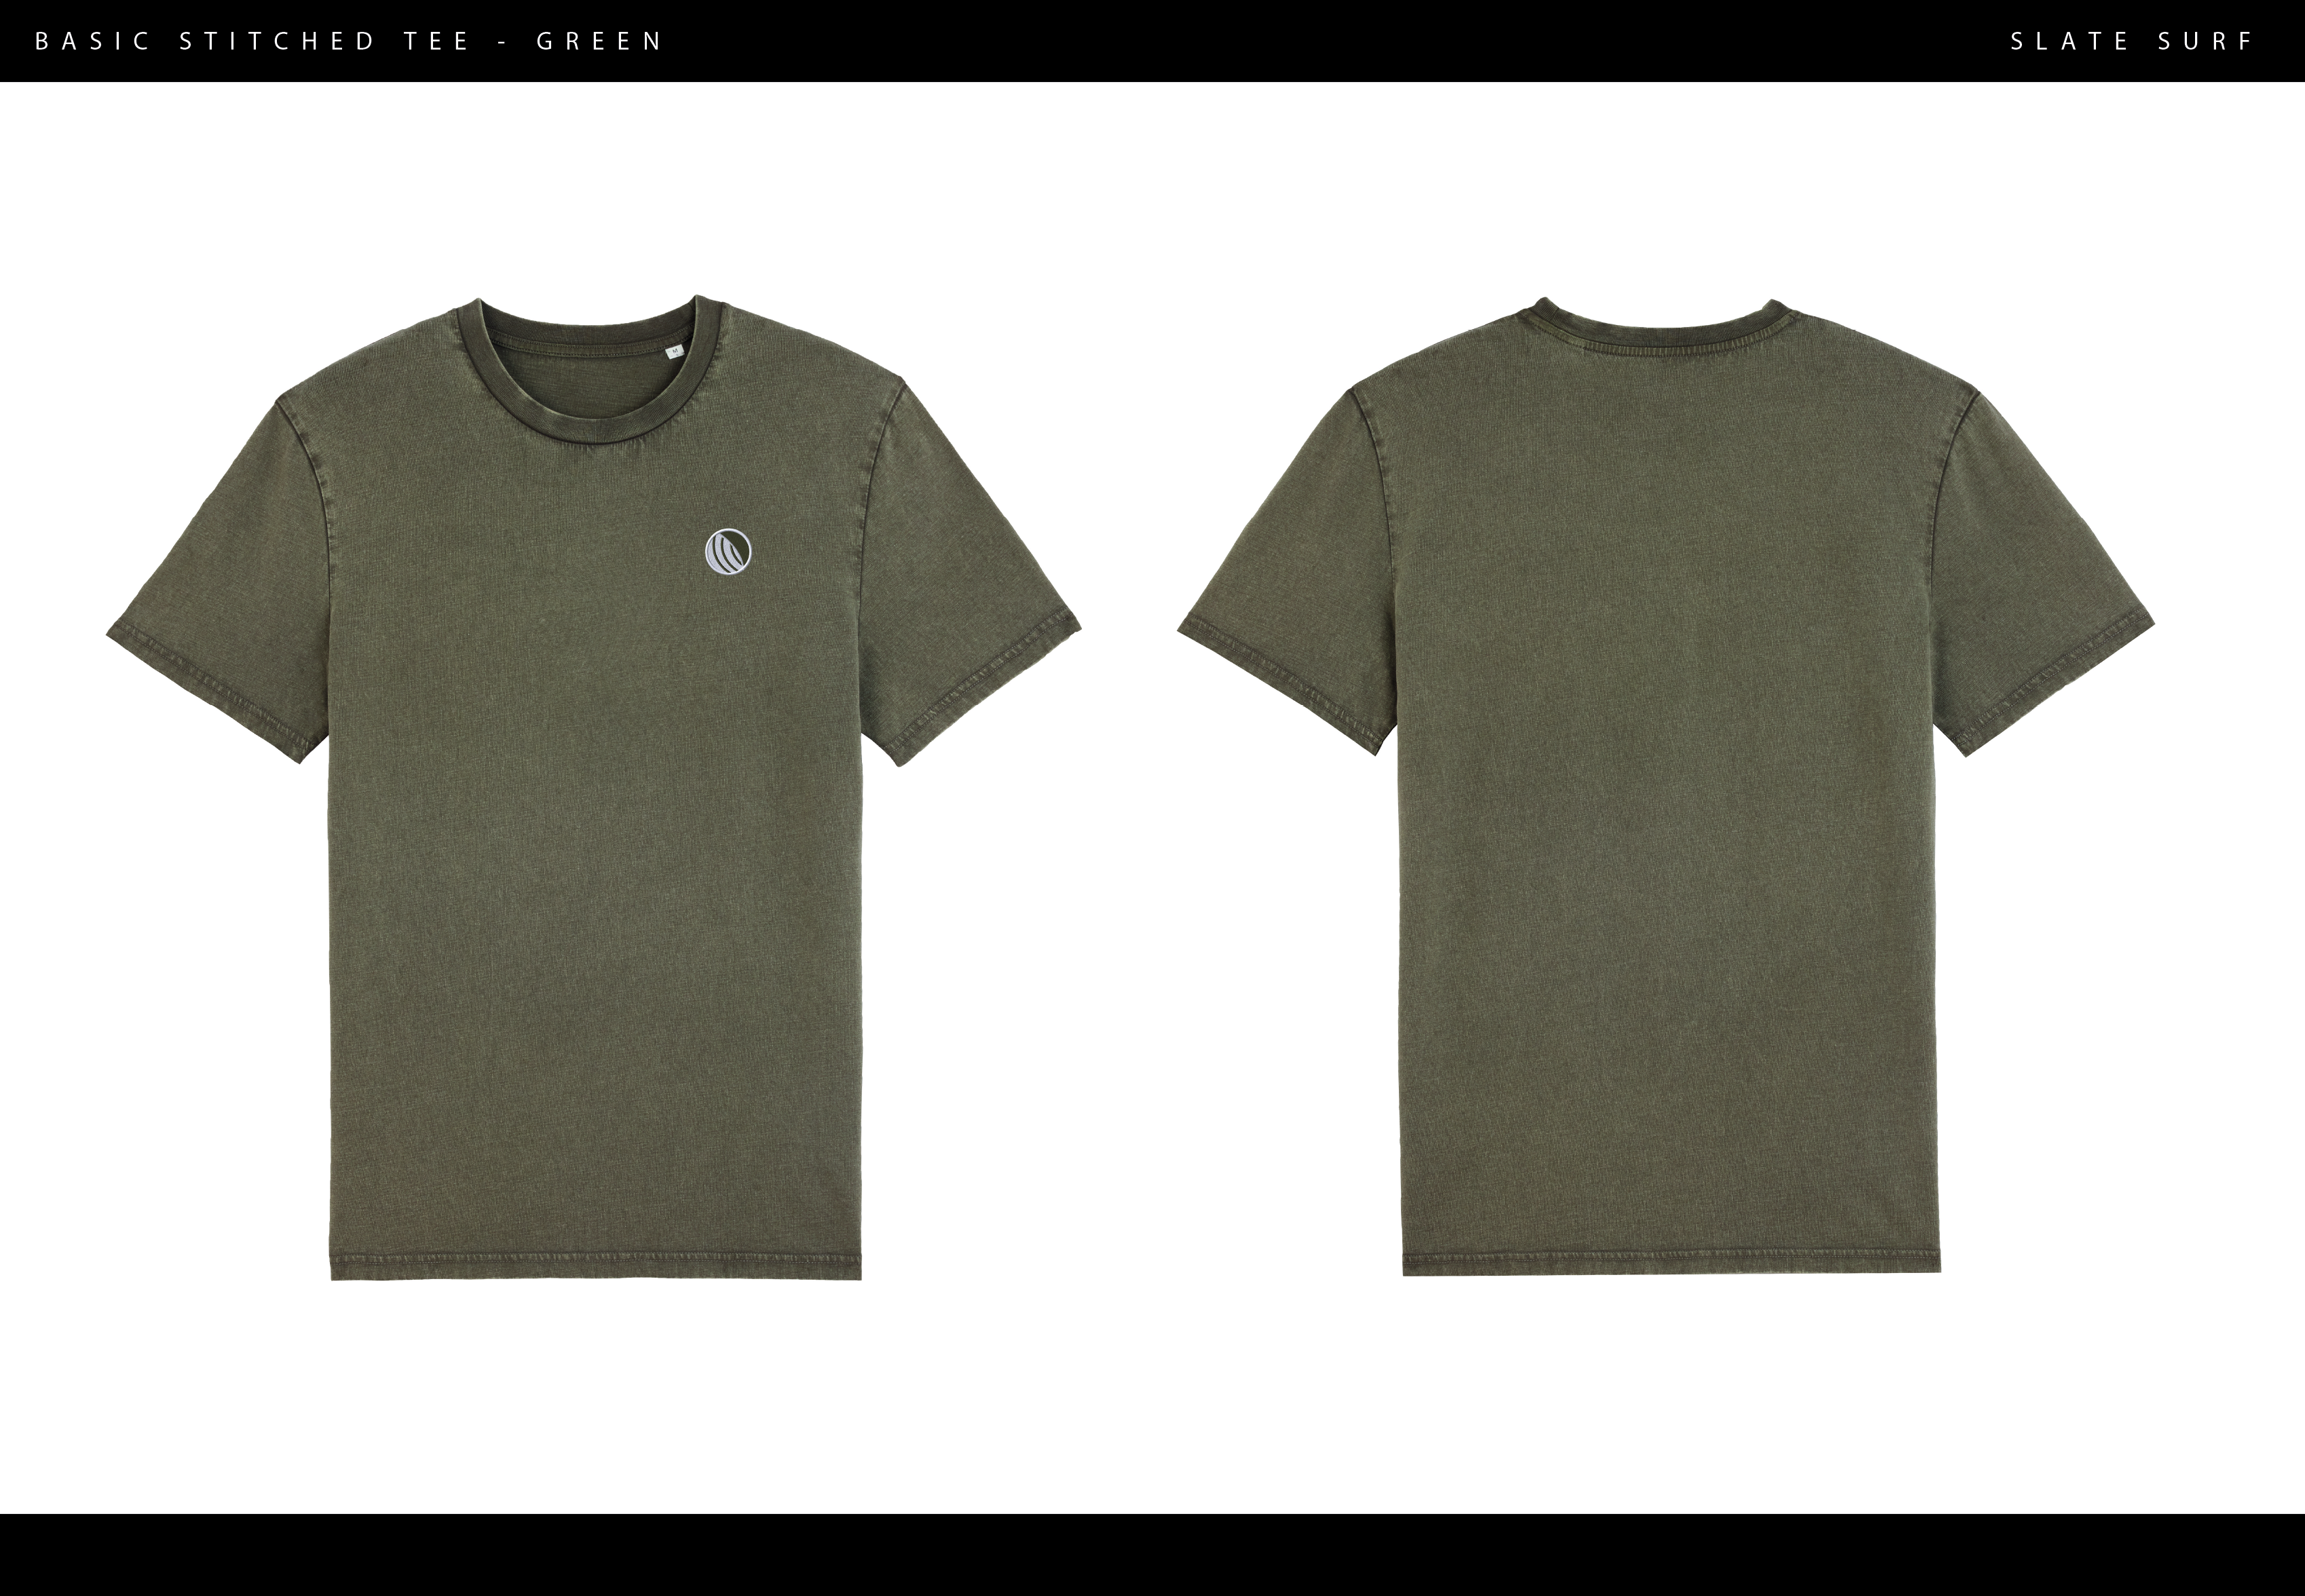 Slate Basic Stitched TEE collection-Green